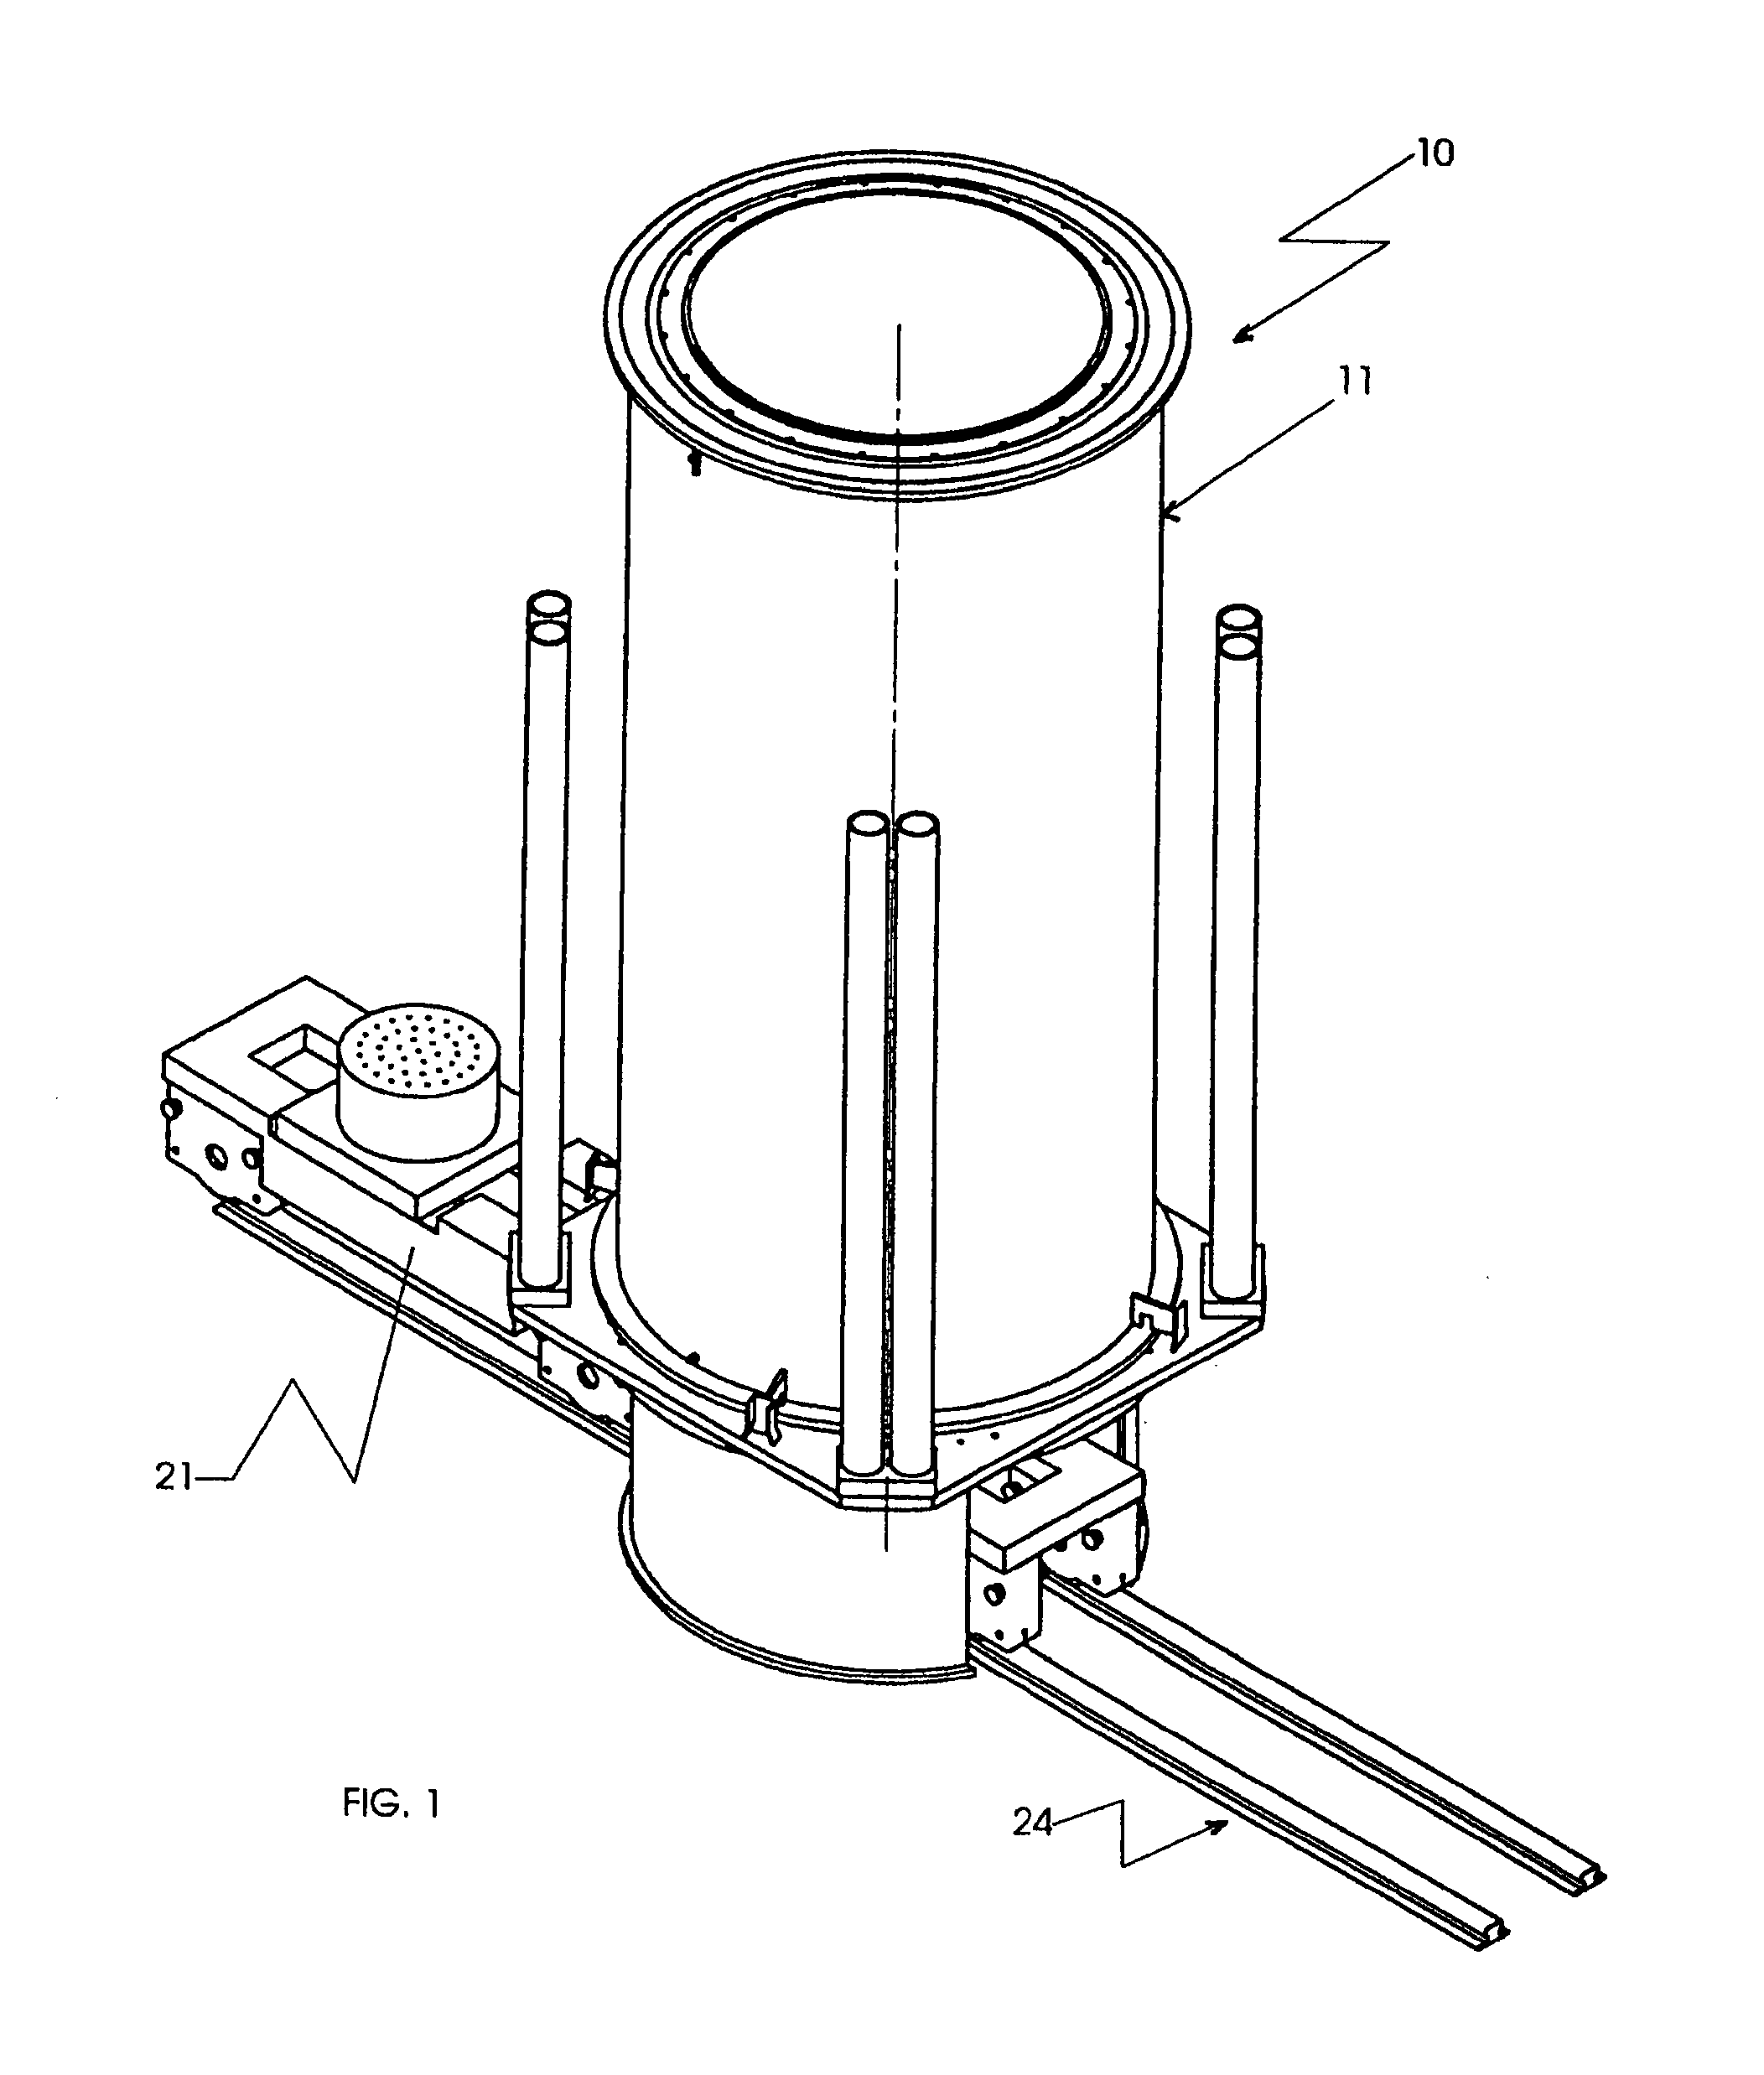 Method and device for remelting metal in an electric furnace